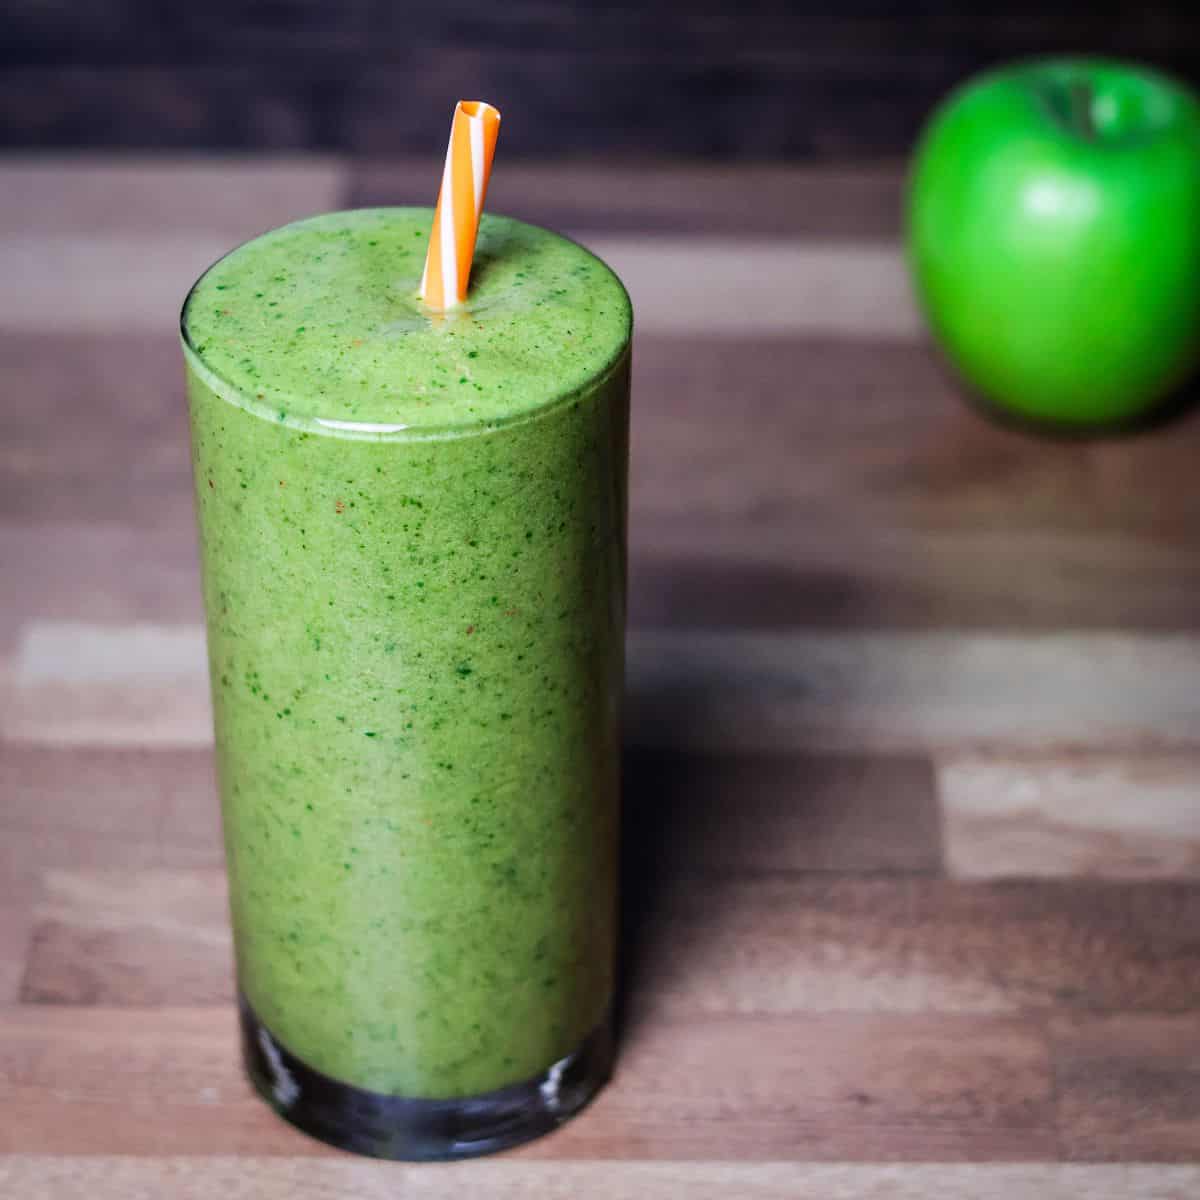 A tall glass filled with a green smoothie, topped with a colorful striped straw, with a green apple 